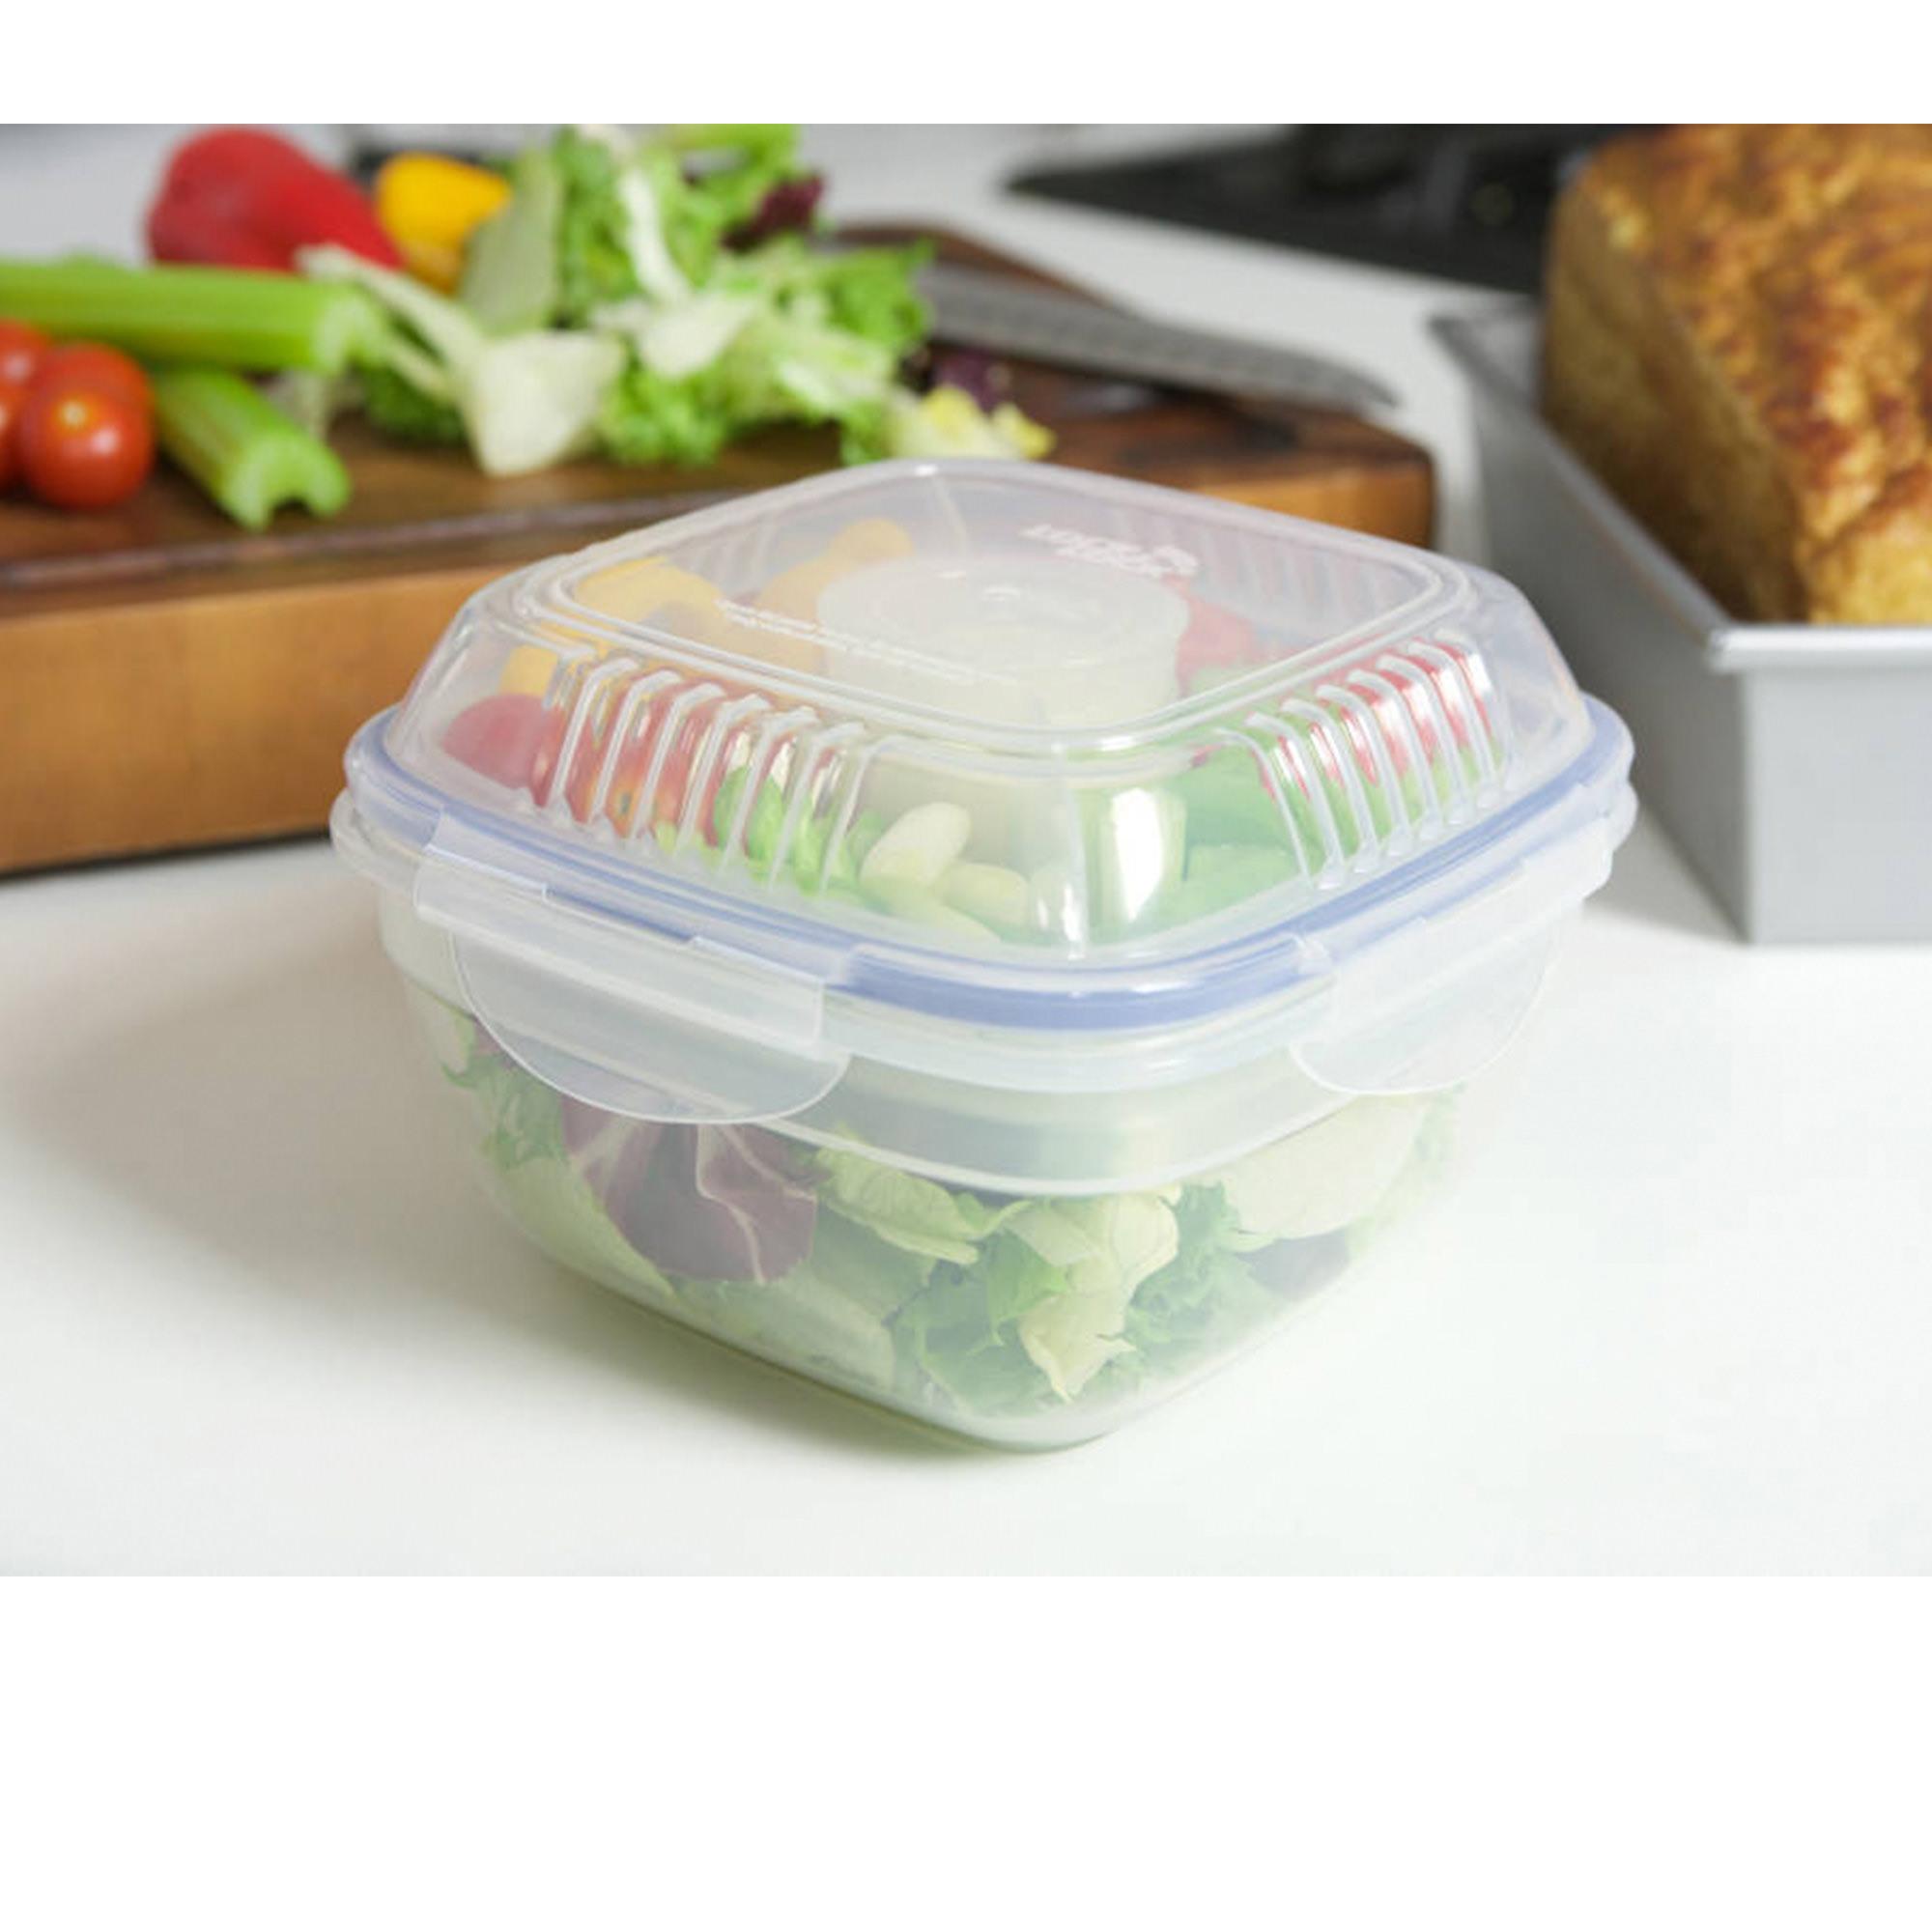 Lock & Lock Special Salad Lunch Box with Dividers 950ml Image 4